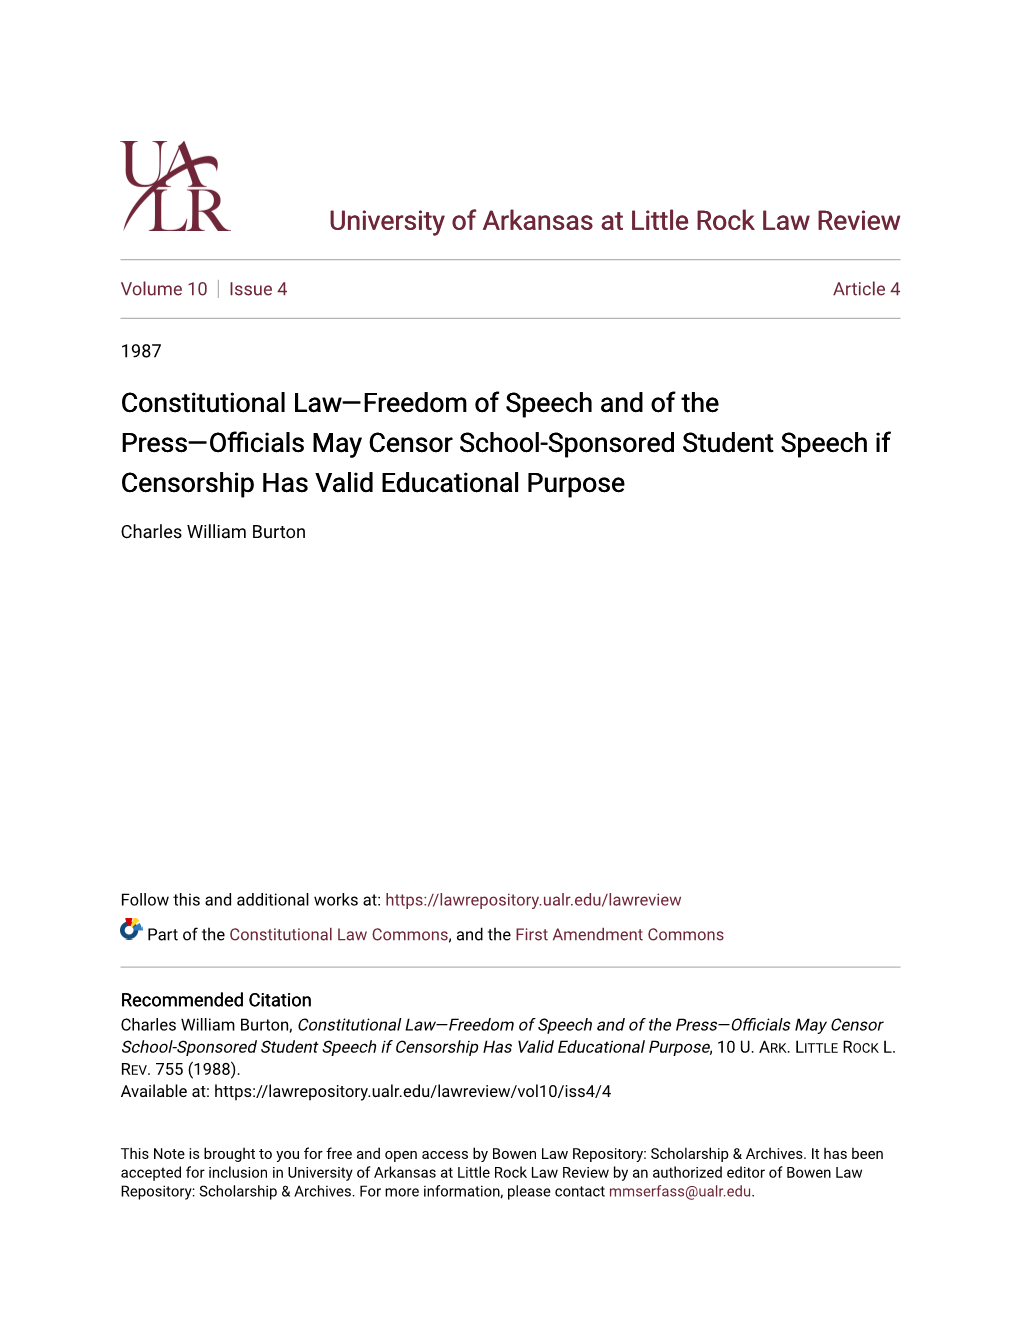 Constitutional Law—Freedom of Speech and of the Press—Officials Yma Censor School-Sponsored Student Speech If Censorship Has Valid Educational Purpose